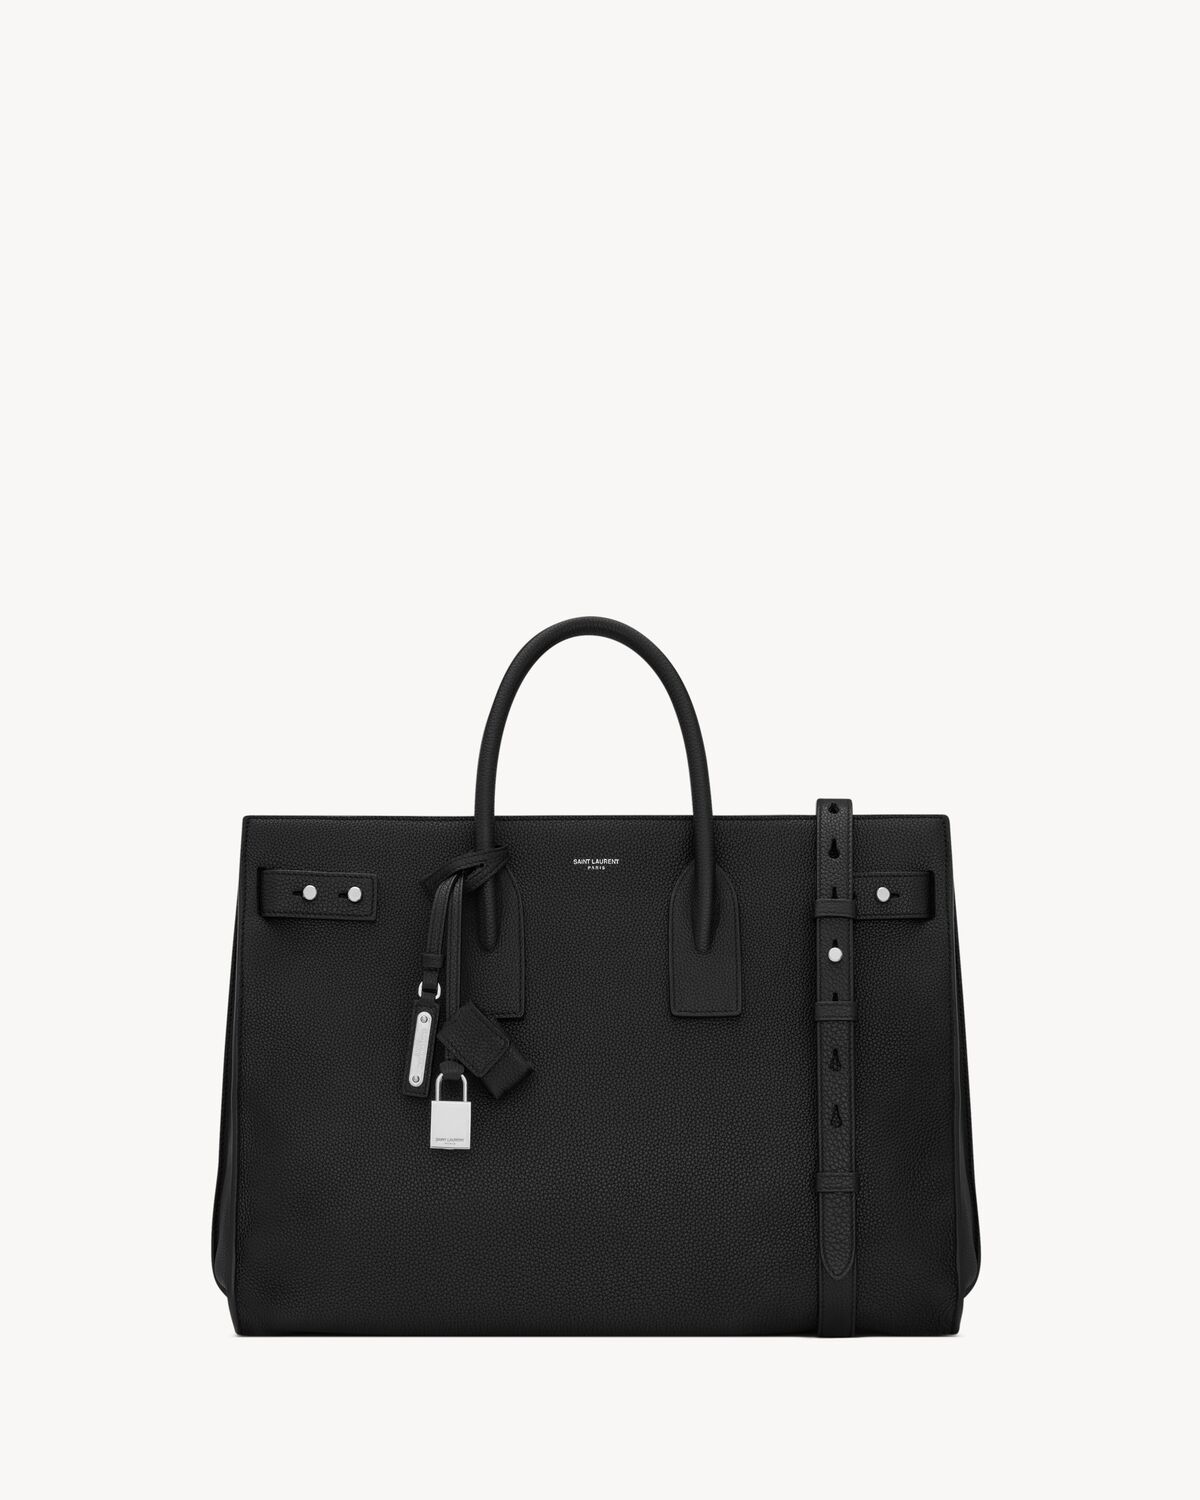 SAC DE JOUR thin large in grained leather